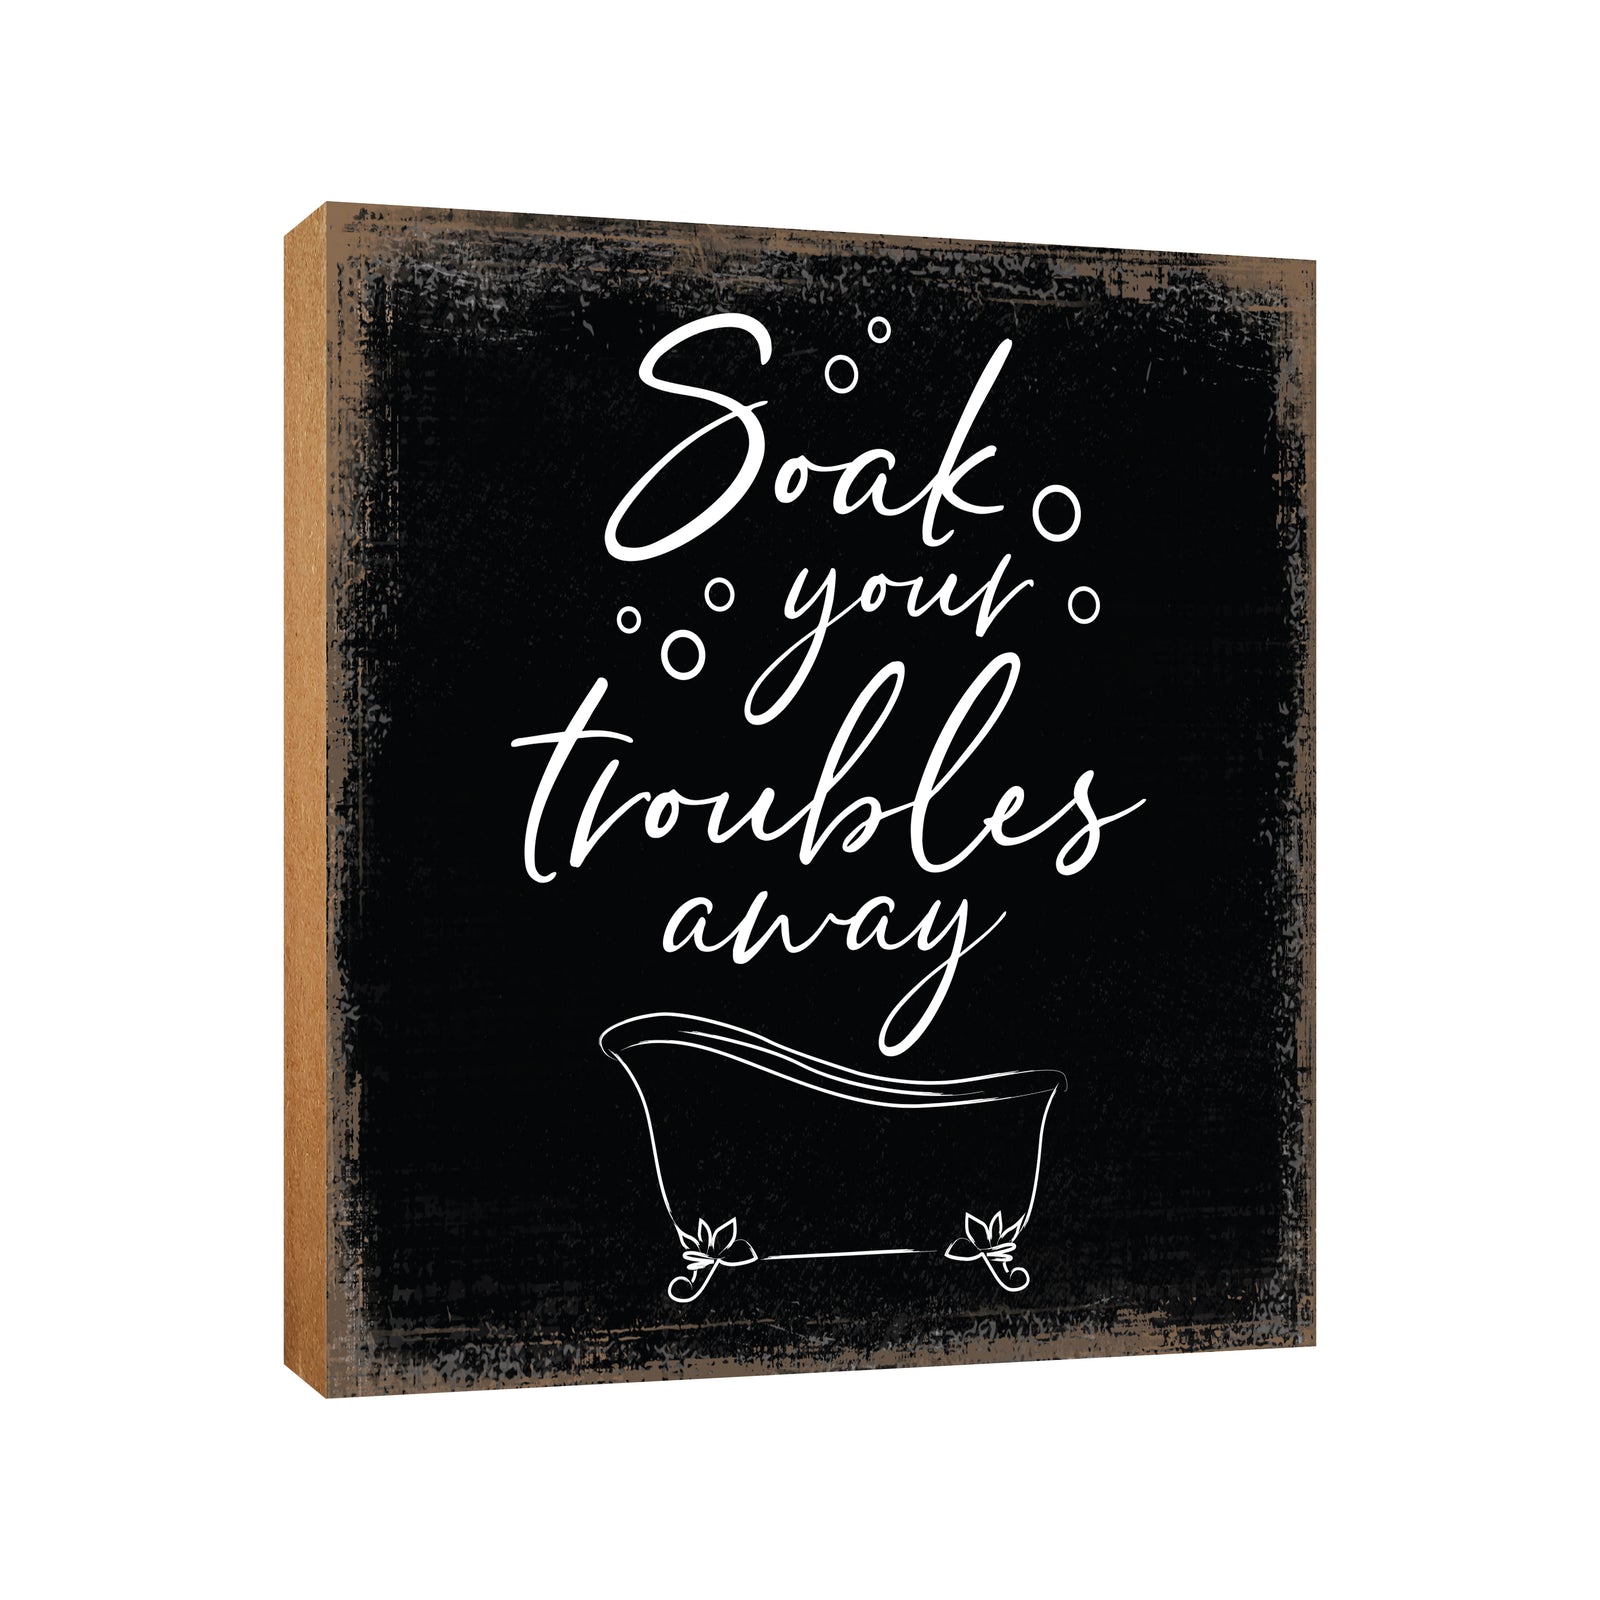 Wooden BATHROOM 6x6 Block shelf decor (Soak Your Troubles) Inspirational Plaque Tabletop and Family Home Decoration